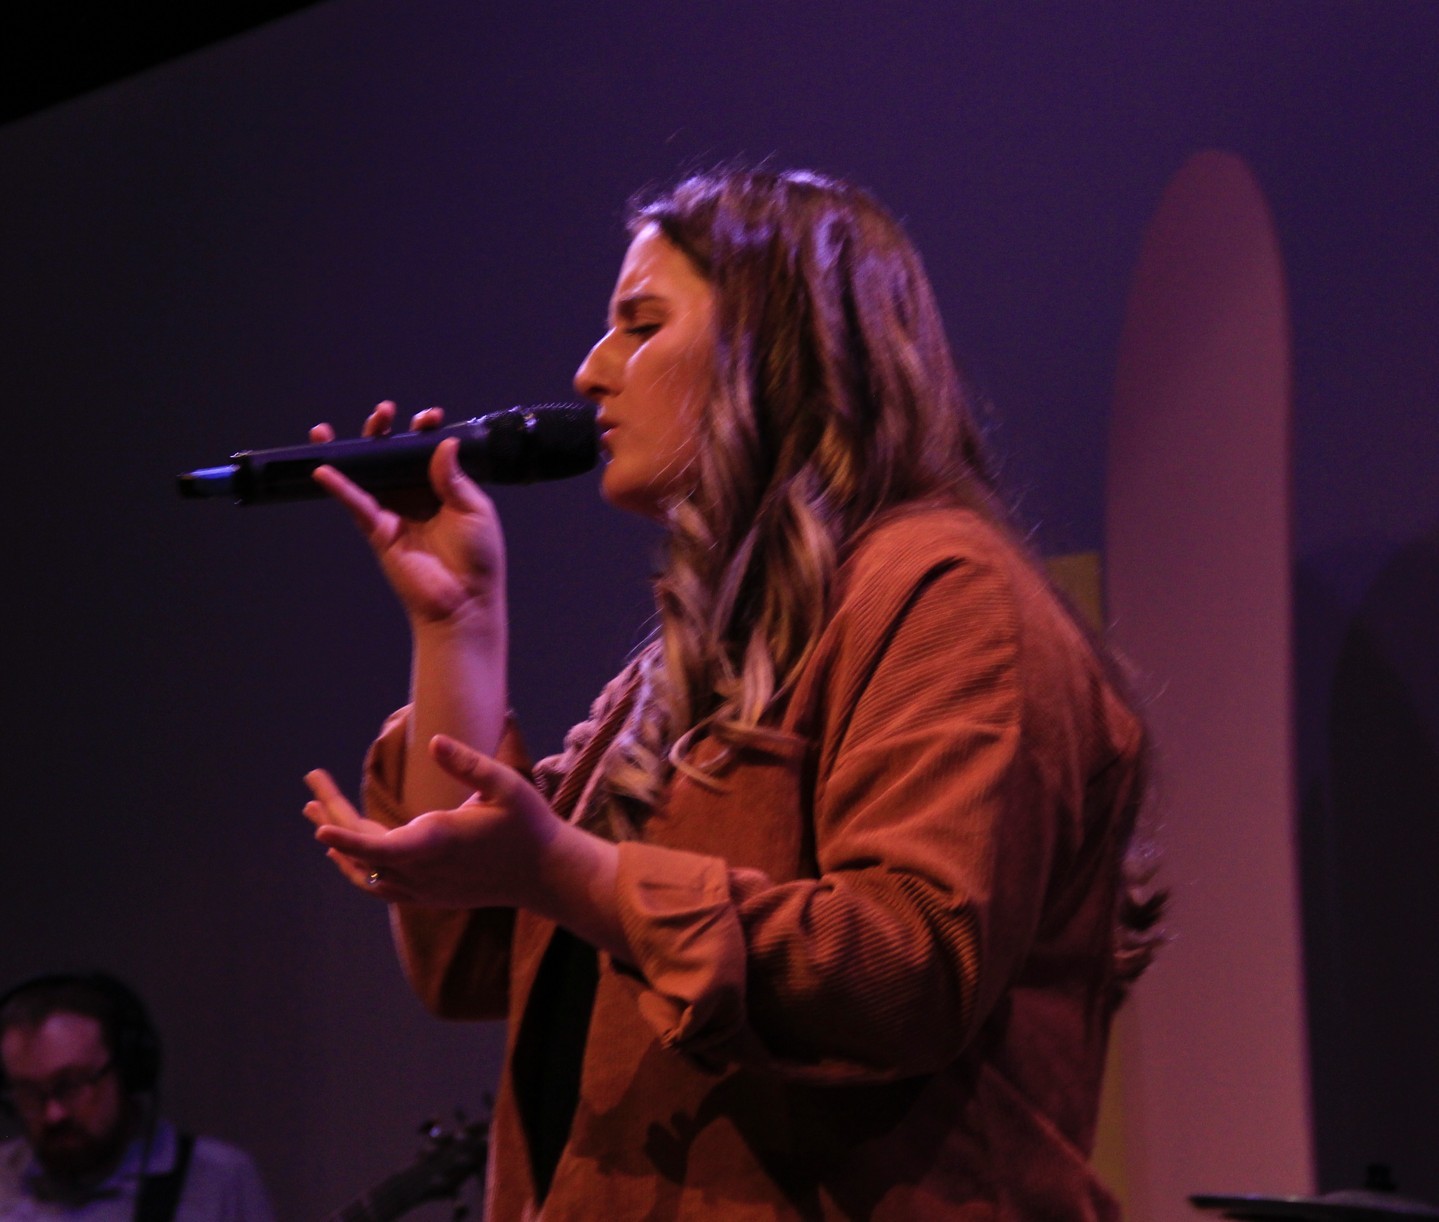 "Sing to the LORD, all the earth; proclaim his salvation day after day!" 1 Chronicles 16:23